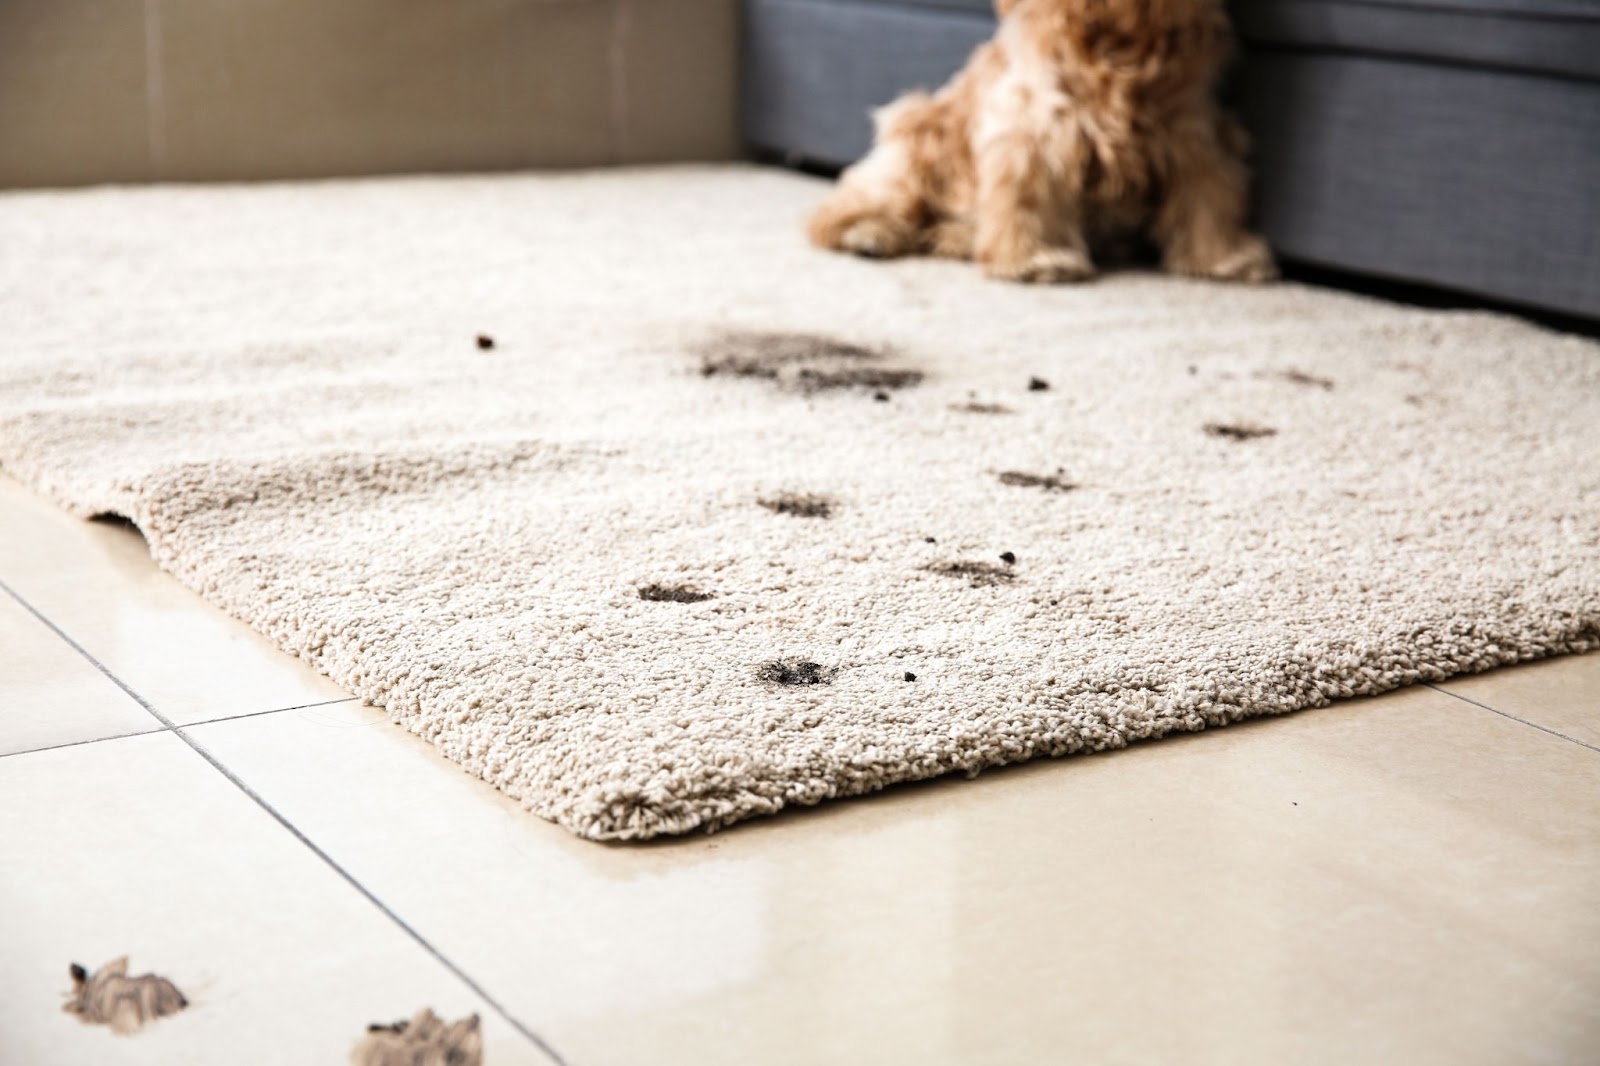 A dog sitting on a rug with paw prints, surrounded by carpet stains, highlighting the need for cleaning carpets.